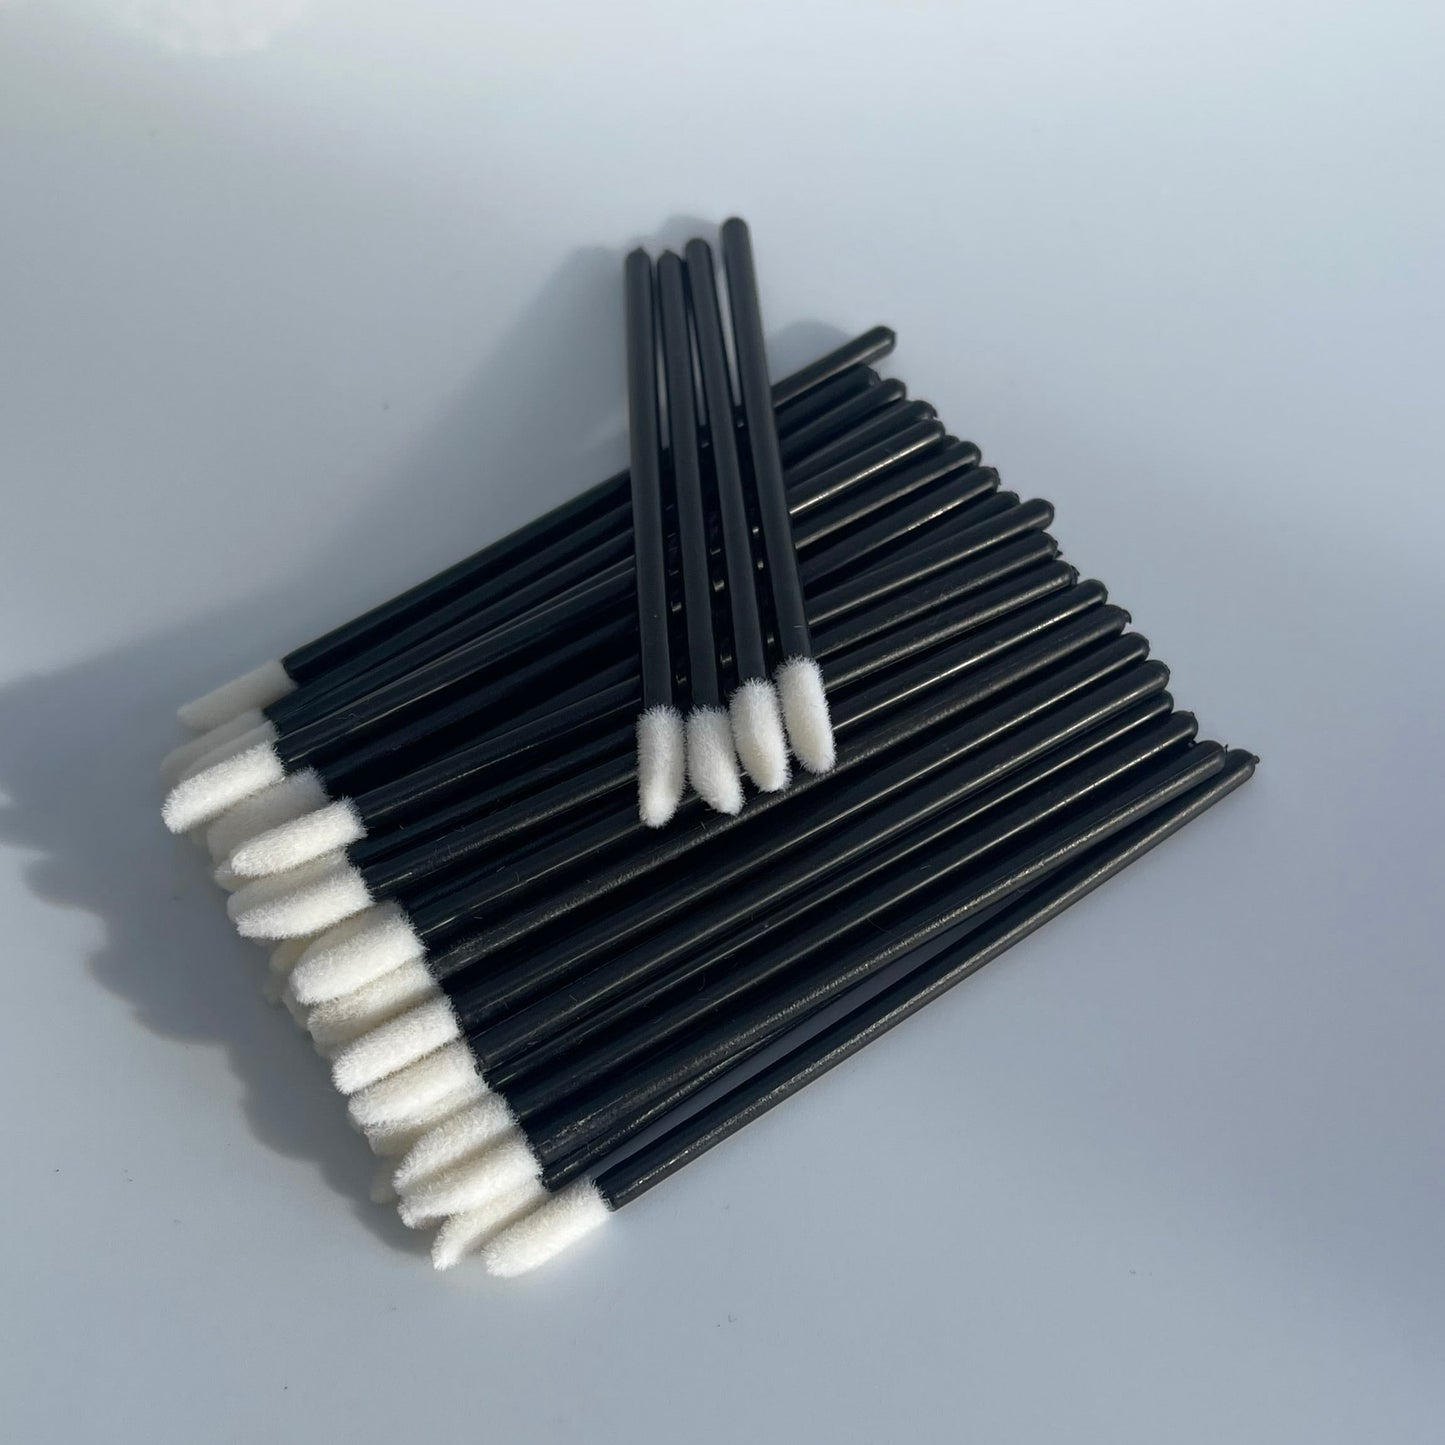 Disposable Lip Brushes